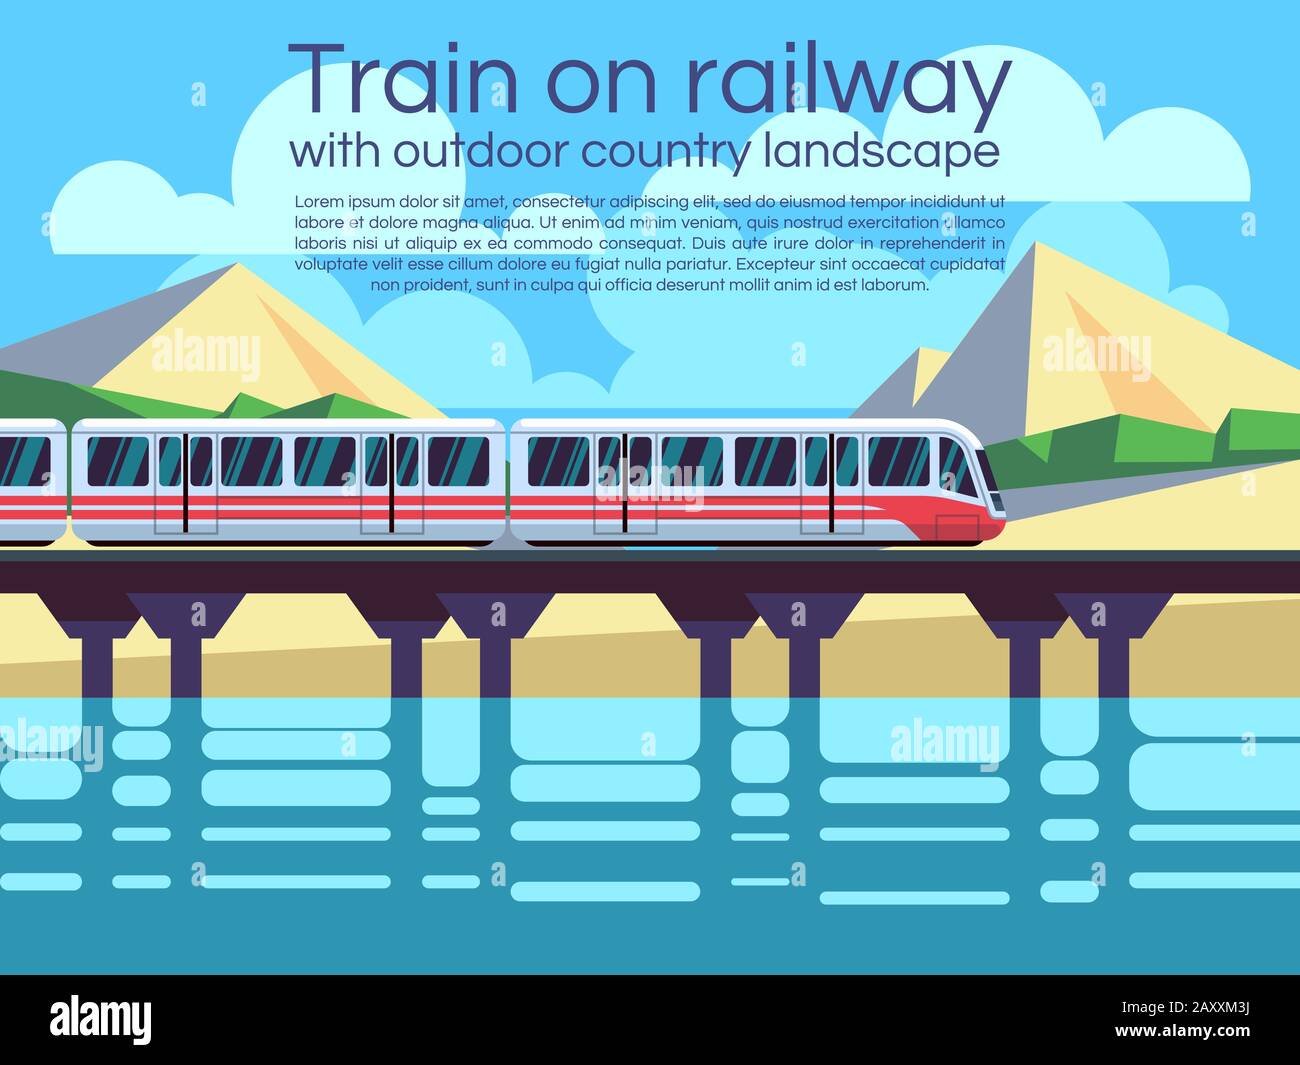 Train on railway with outdoor country landscape. Vector travel concept background. Train outdoor, transportation train, travel train illustration Stock Vector